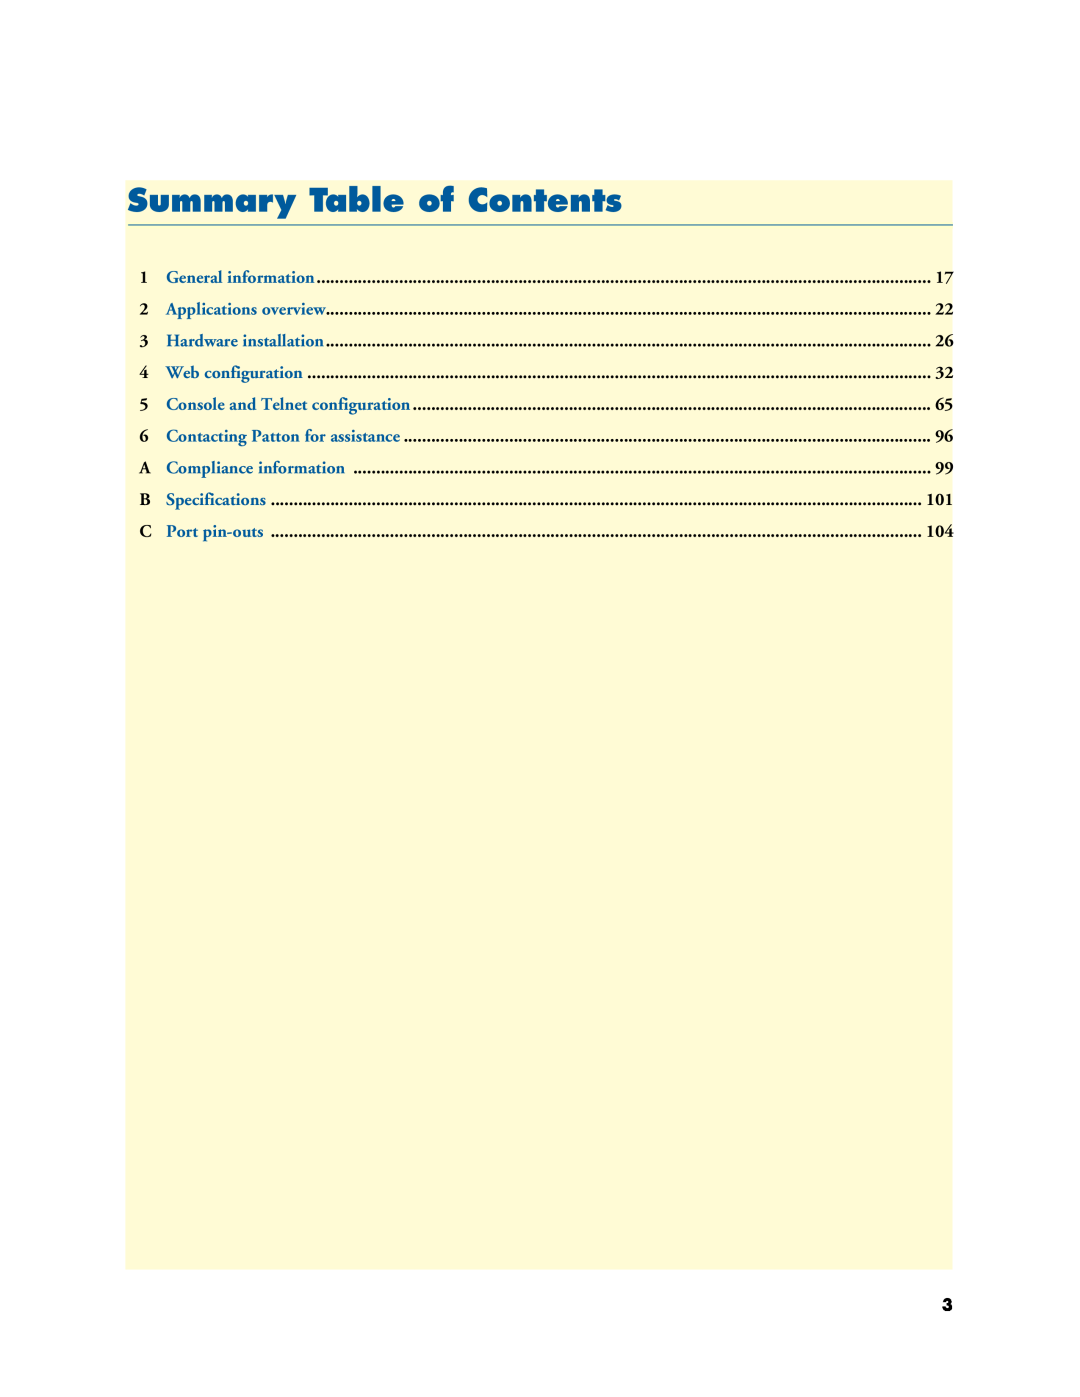 Patton electronic 3202 manual Summary Table of Contents 